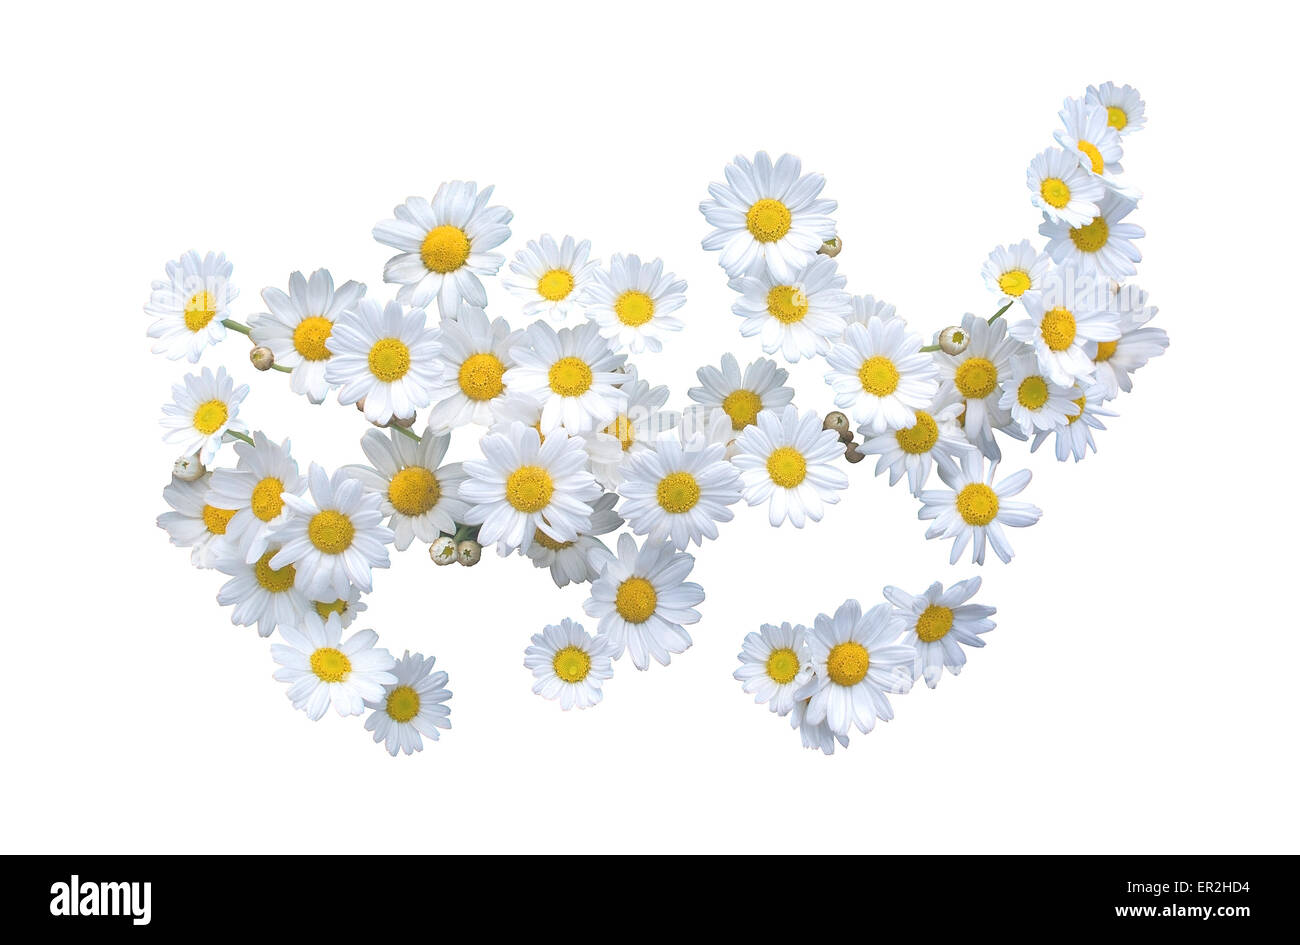 White daisy flower spread isolated on white. Stock Photo